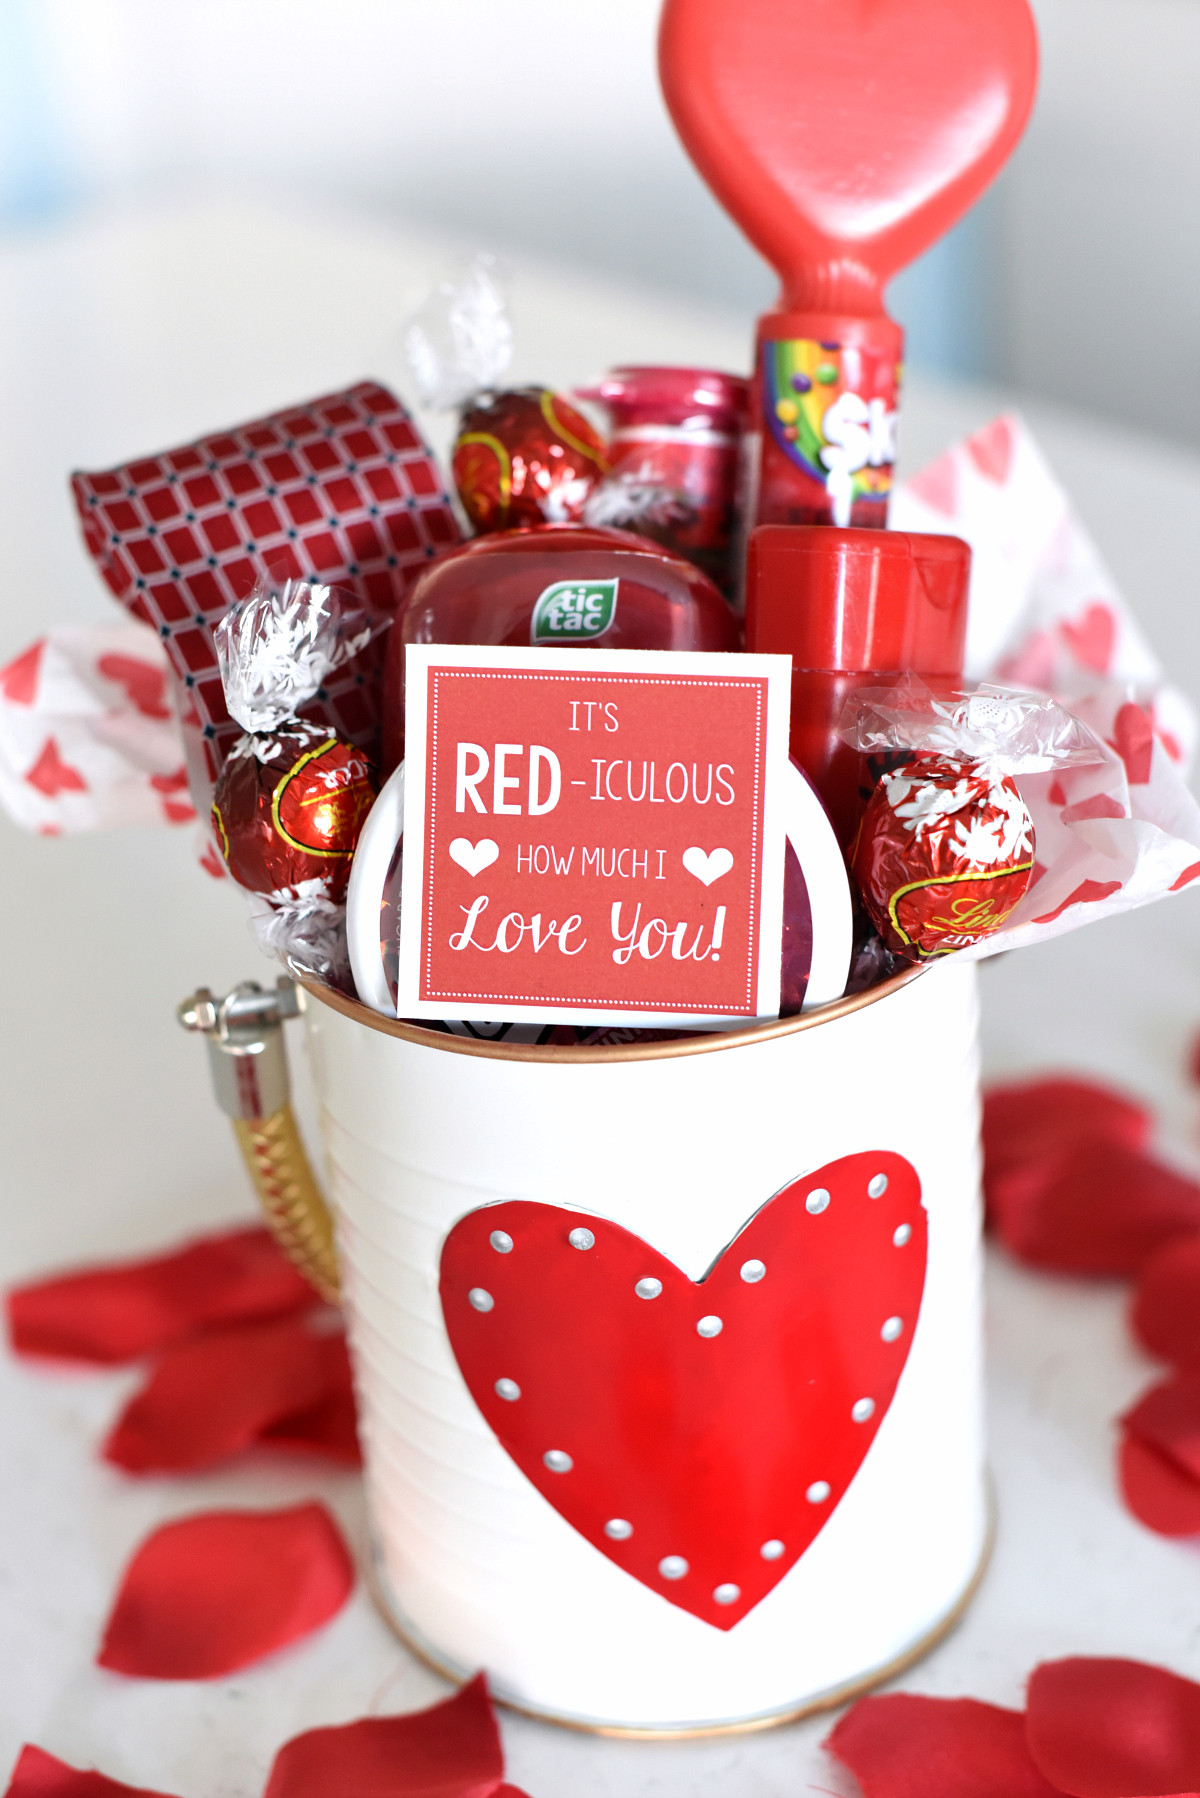 Gift Ideas For Him On Valentine'S Day
 Cute Valentine s Day Gift Idea RED iculous Basket